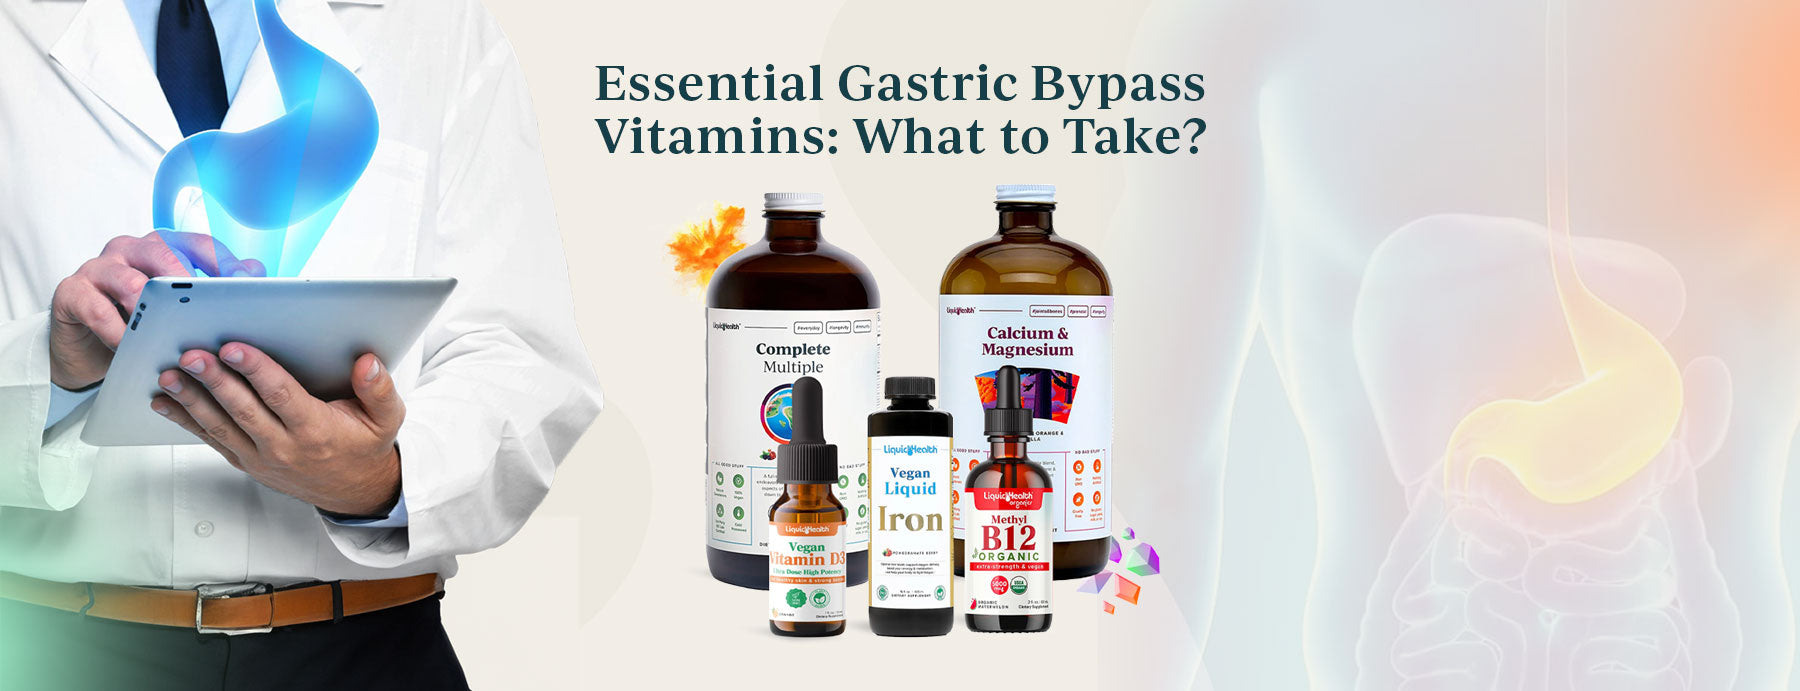 Essential Gastric Bypass Vitamins: What to Take?